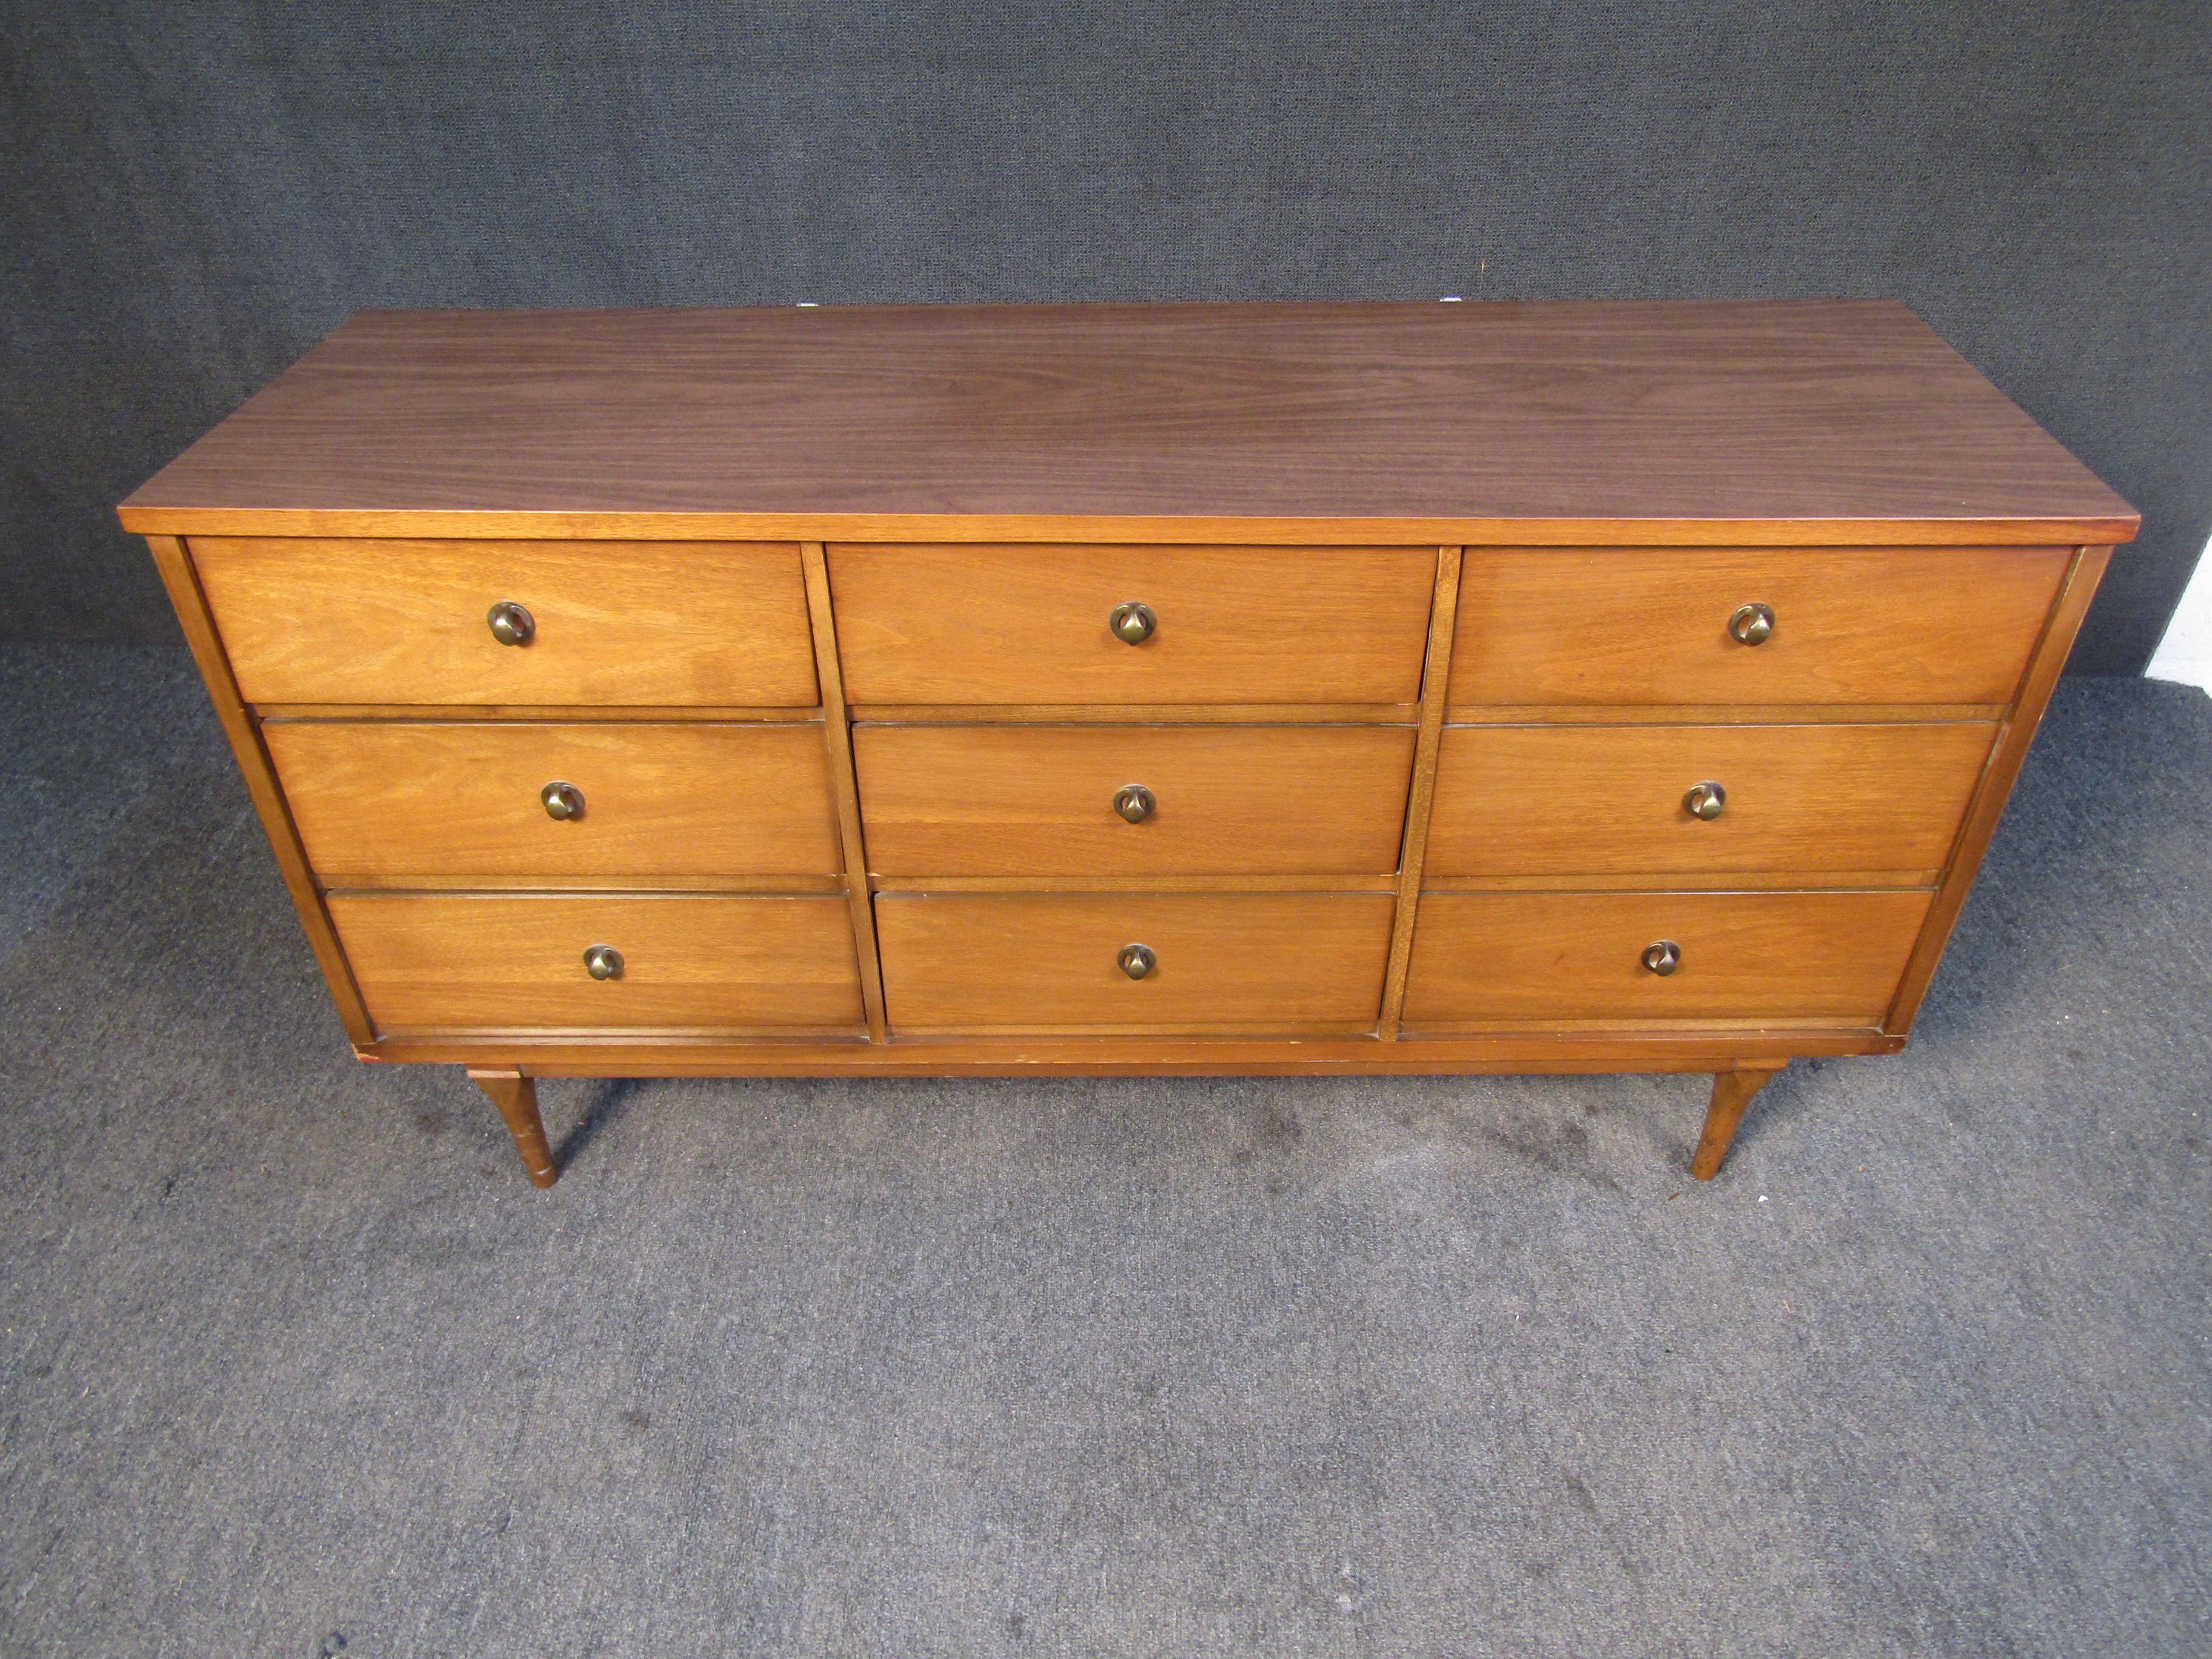 This vintage dresser uses walnut and brass with a Mid-Century Modern design for a timeless look. Please confirm item location with seller (NY/NJ).